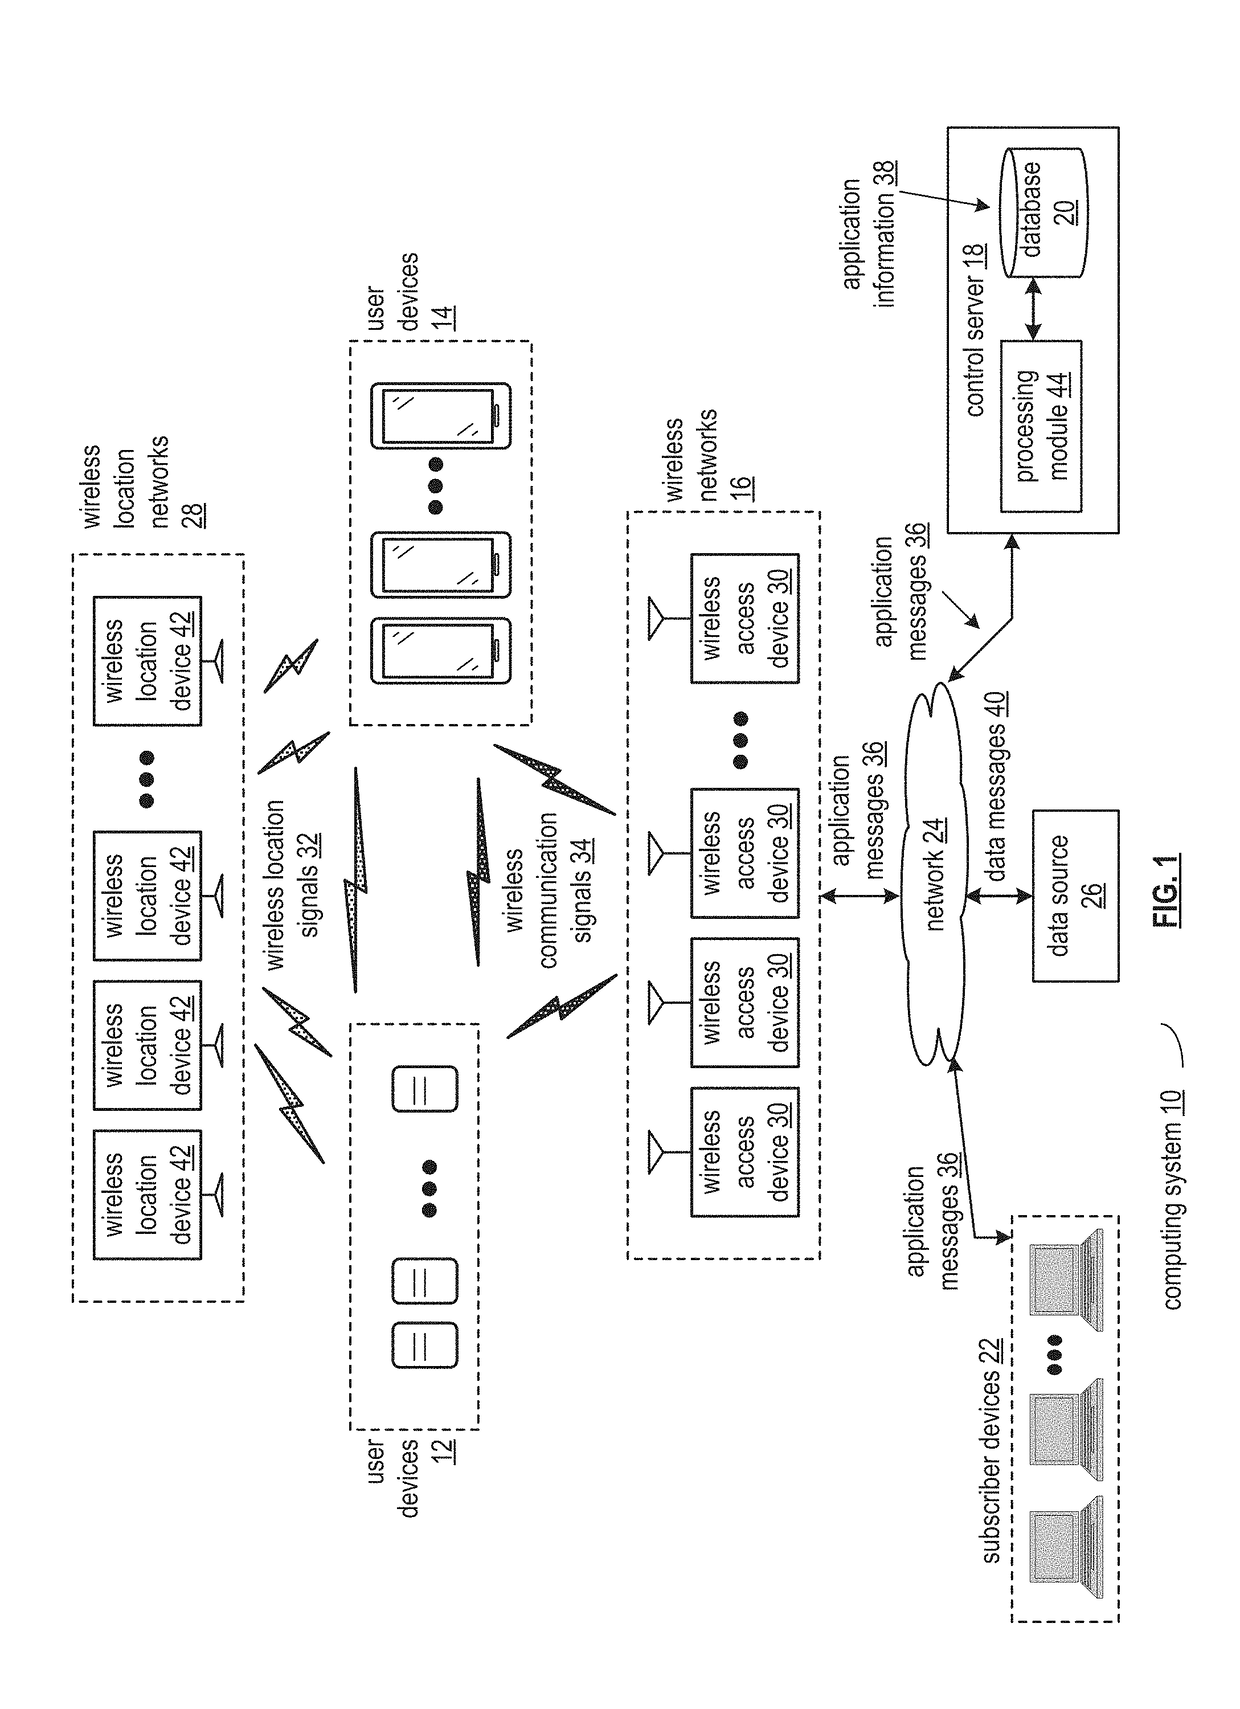 Synchronizing location status information in a computing system